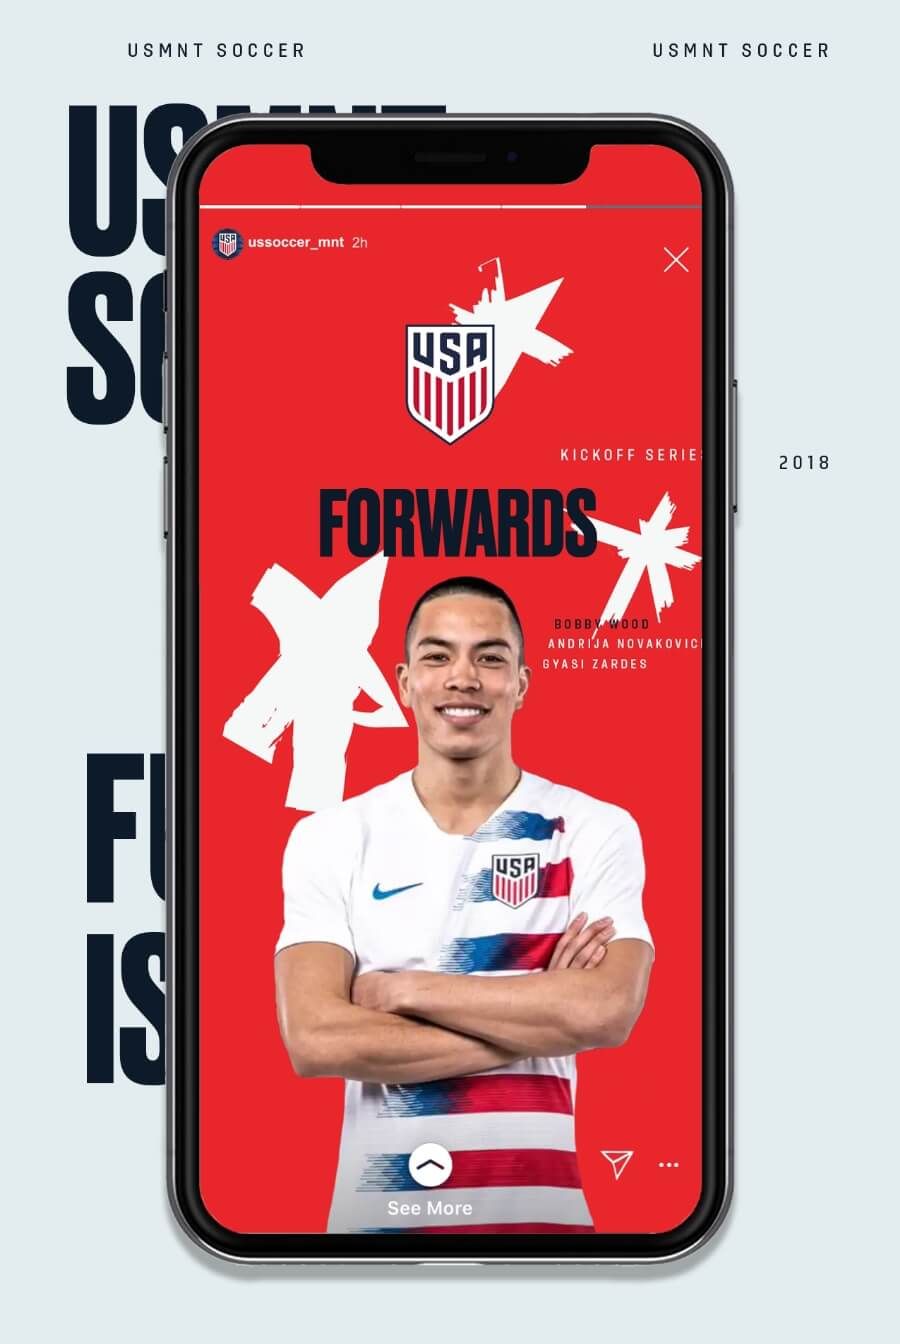 Instagram story from @ussoccer_mnt shows US soccer player against red background FORWARDS kickoff series